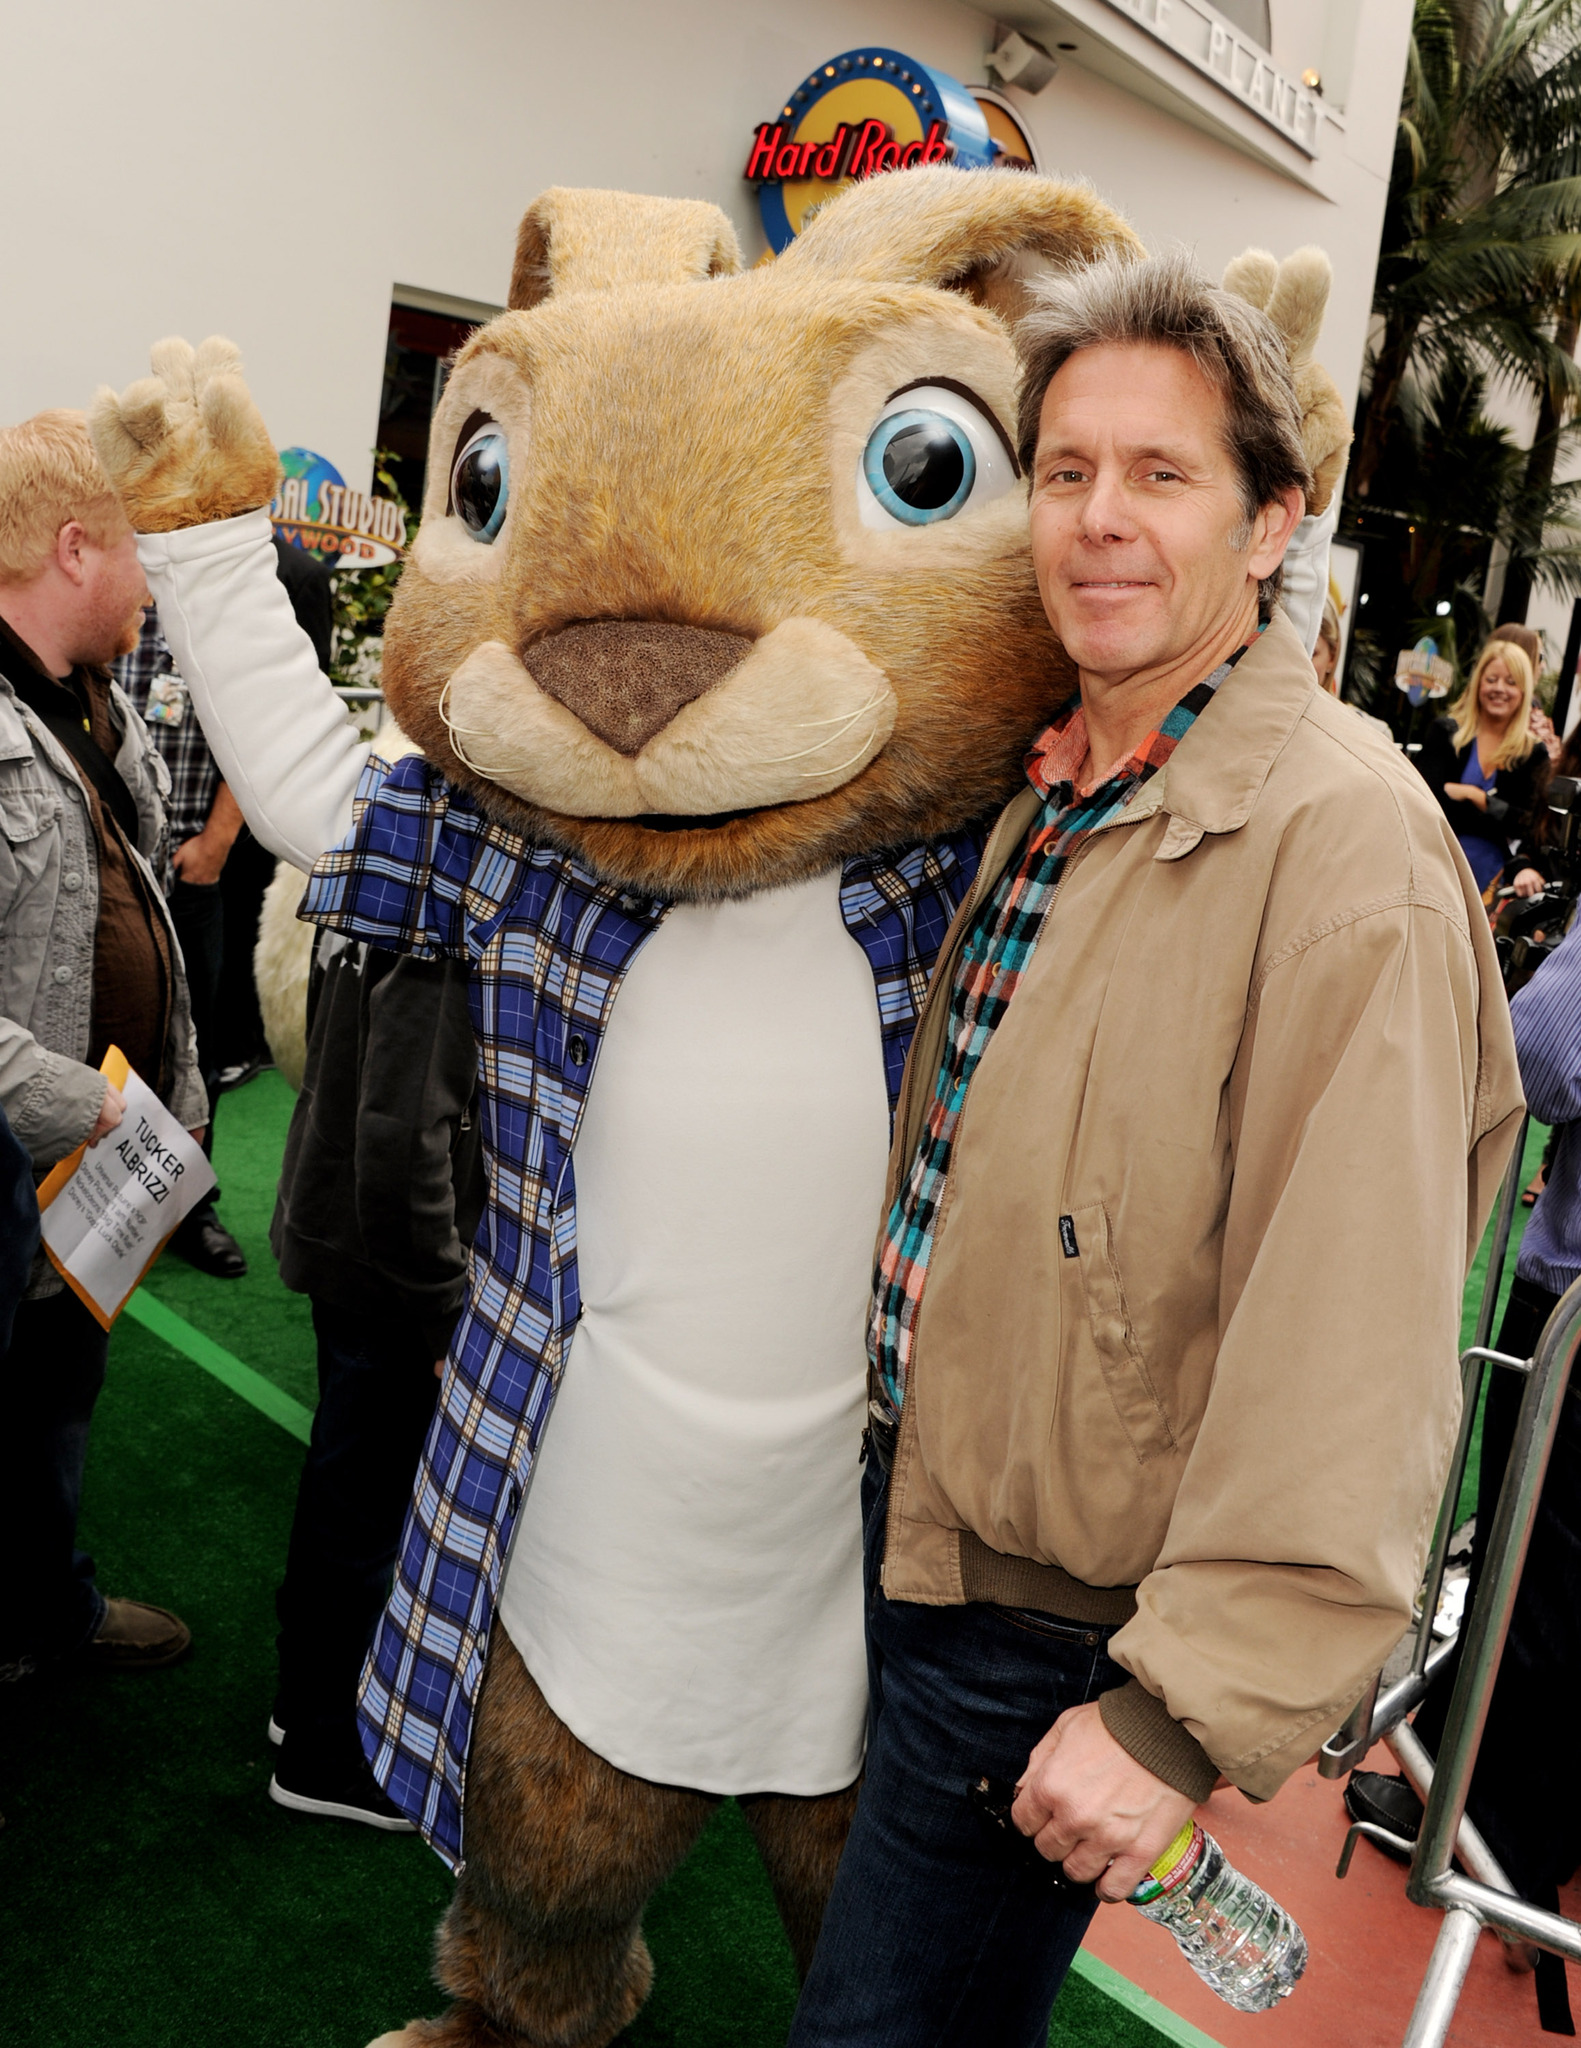 Gary Cole at event of Op (2011)